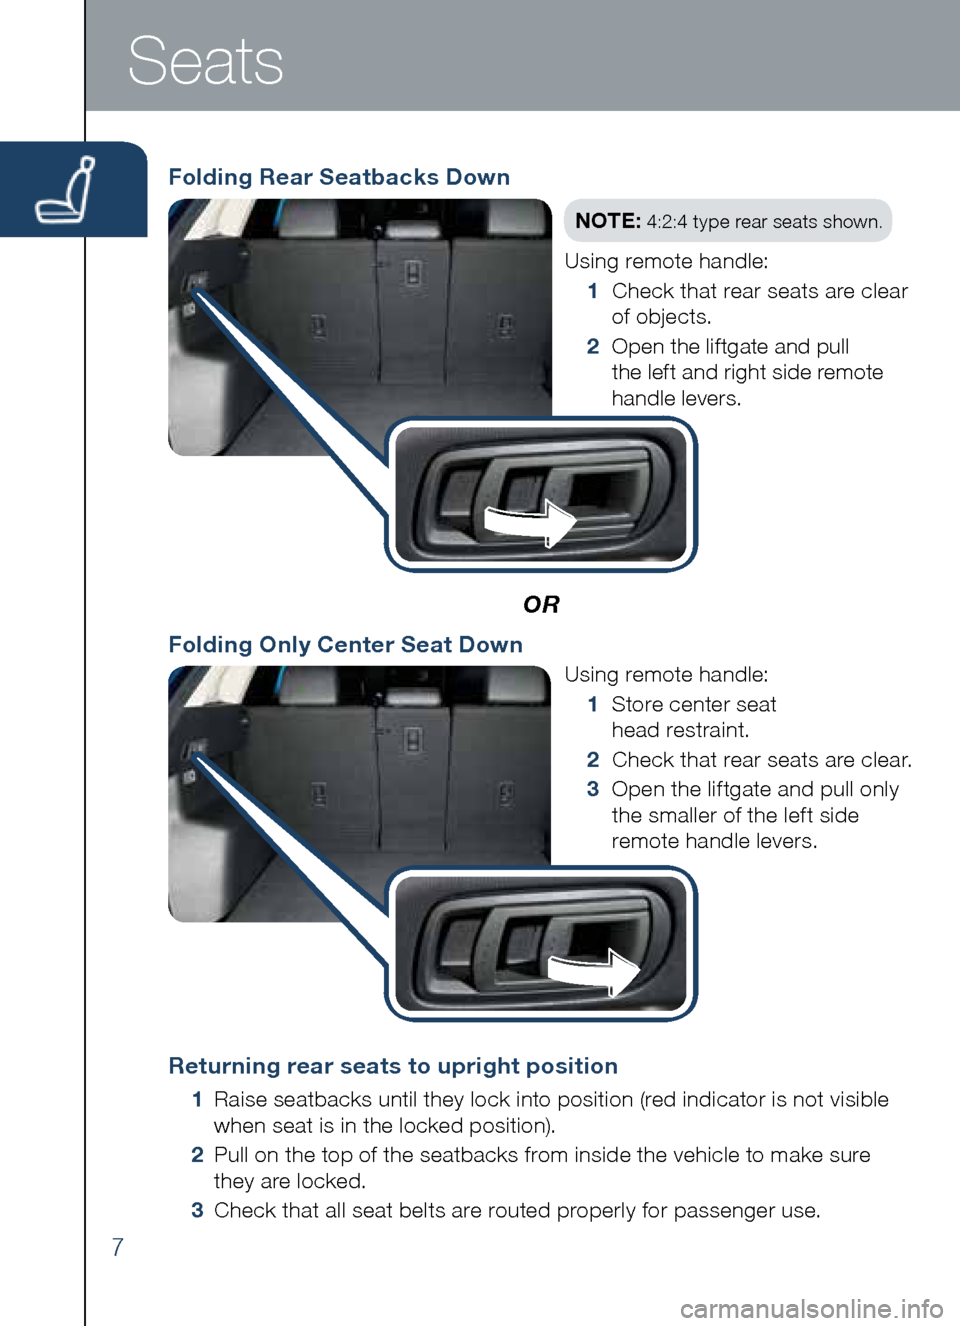 MAZDA MODEL CX-5 2014  Smart Start Guide (in English) Folding Rear Seatbacks Down
OR
Returning rear seats to upright position
	1	 Raise	seatbacks	until	they	lock	into	position	(red	indicator	is	not	visible			
	 	 when	seat	is	in	the	locked	position).
	 2